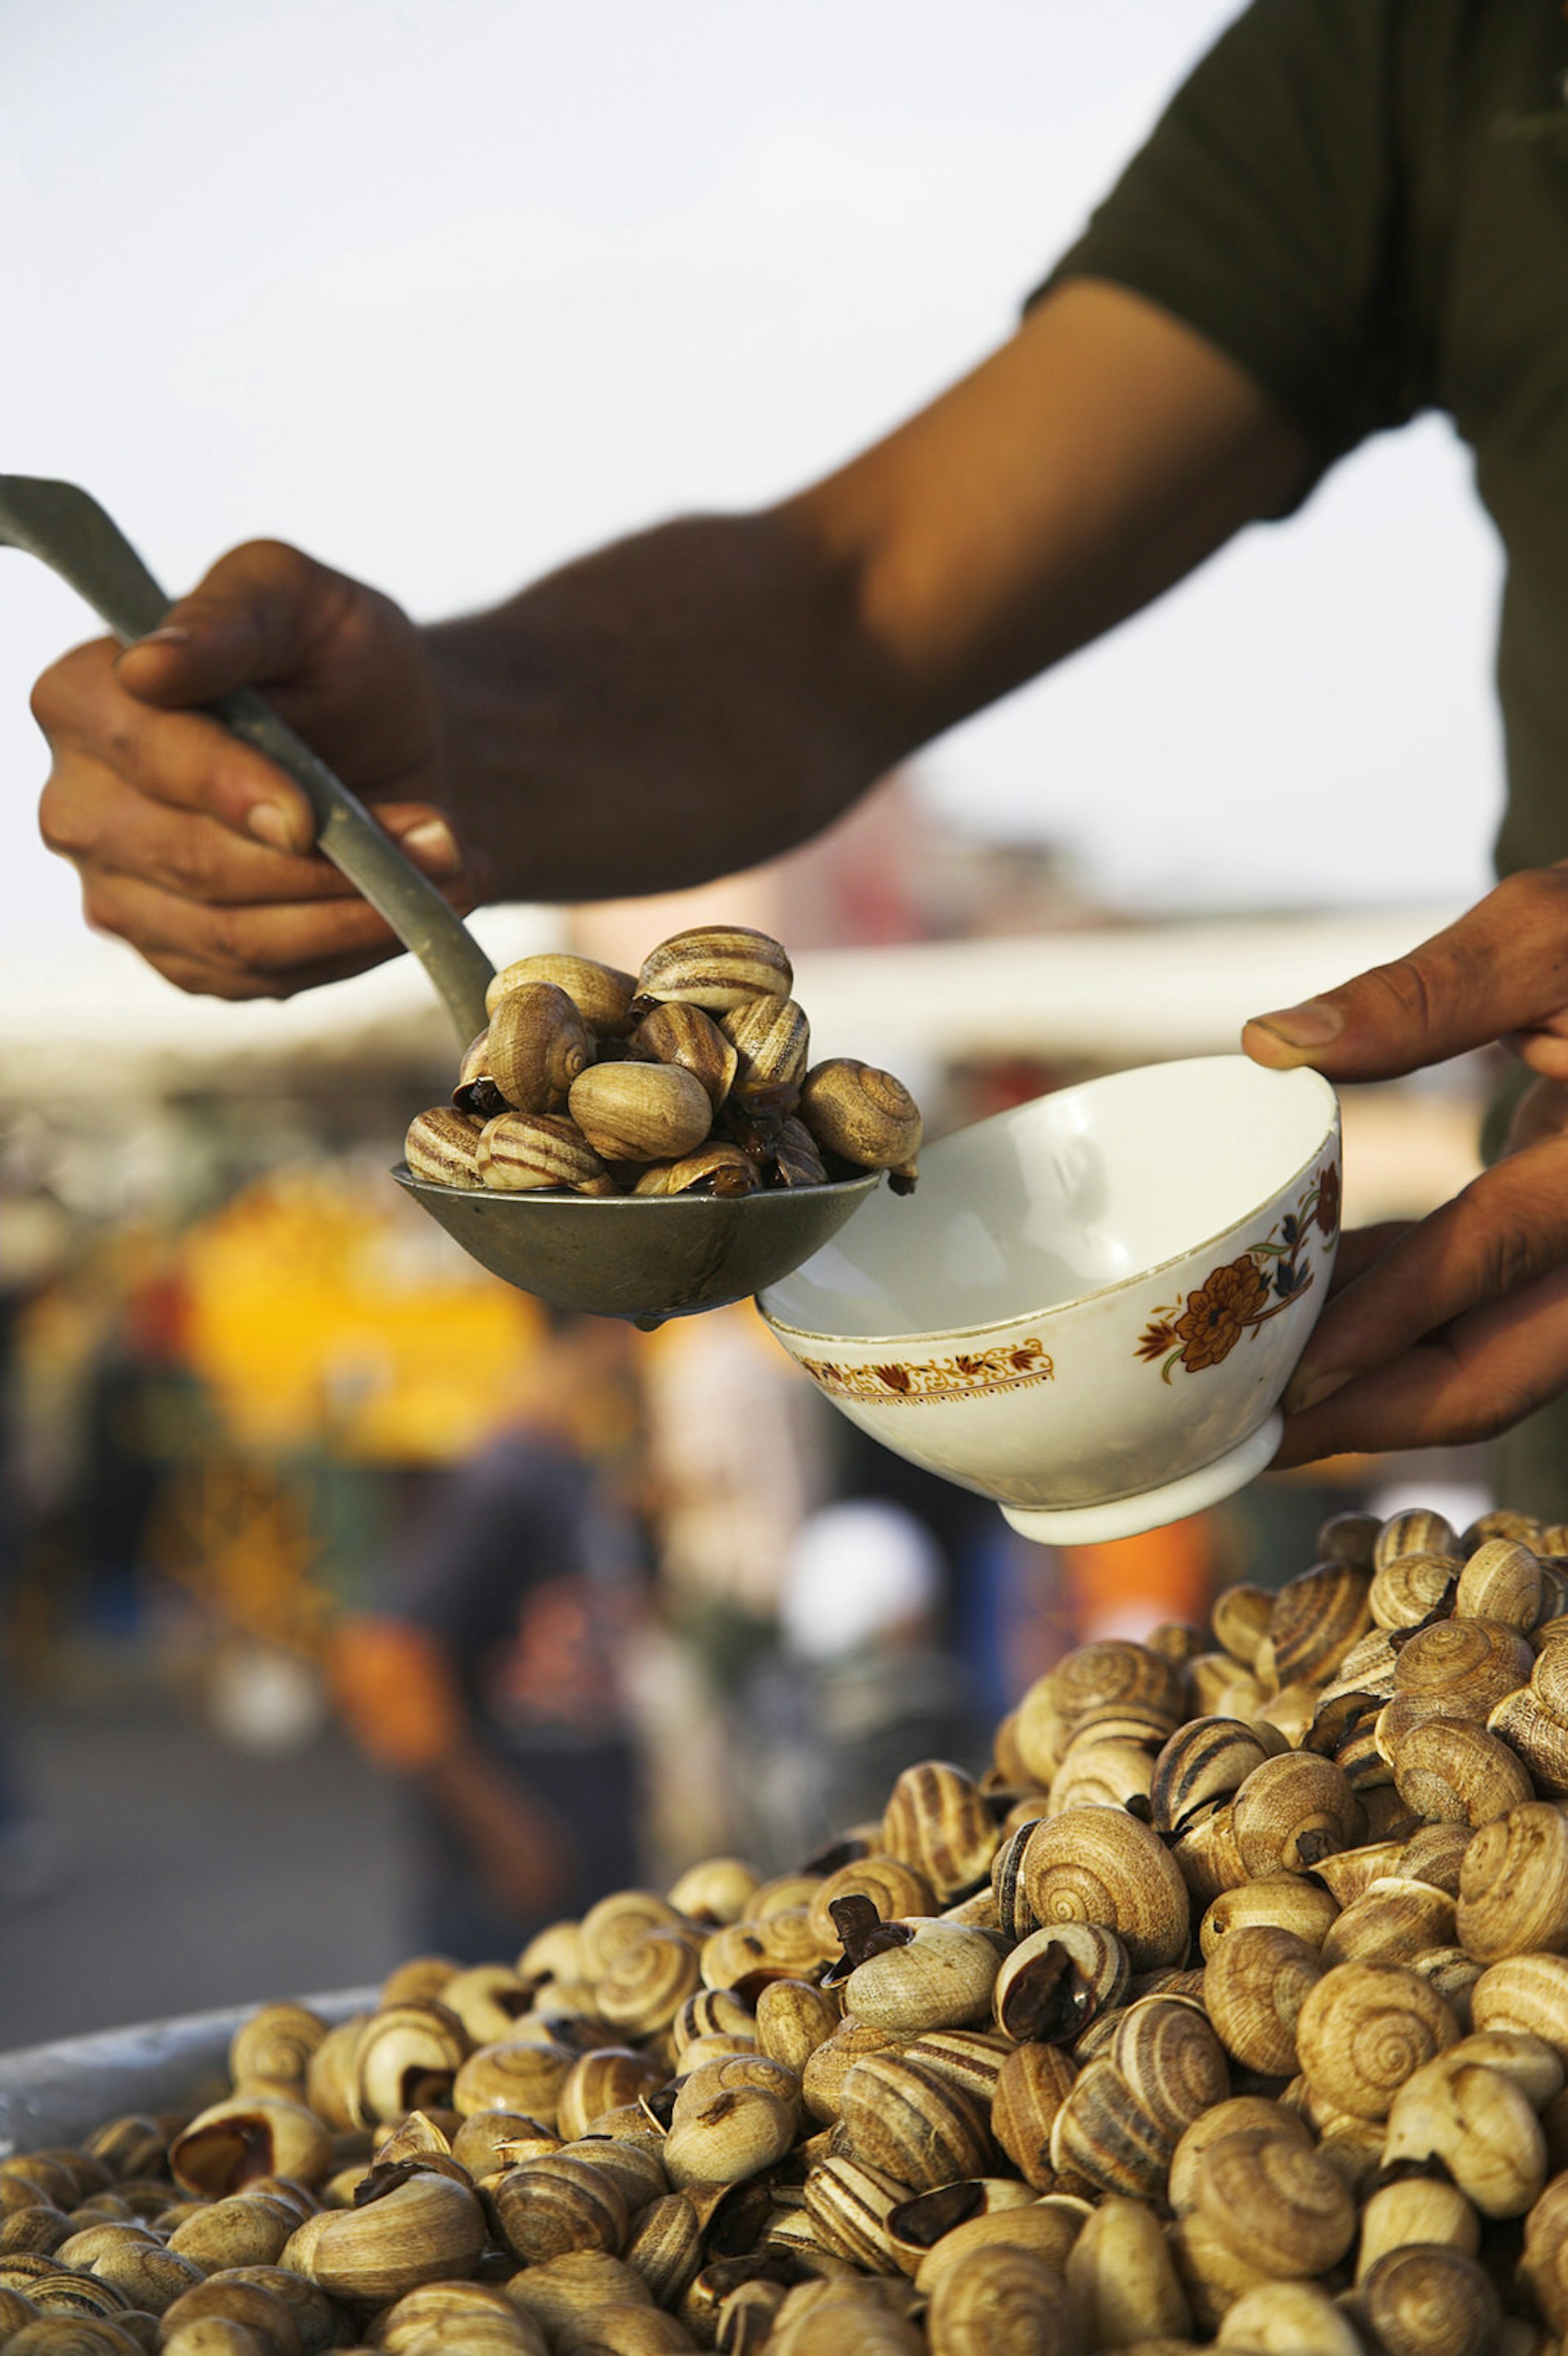 A close up of a vendor's ladle that is full of cooked snails